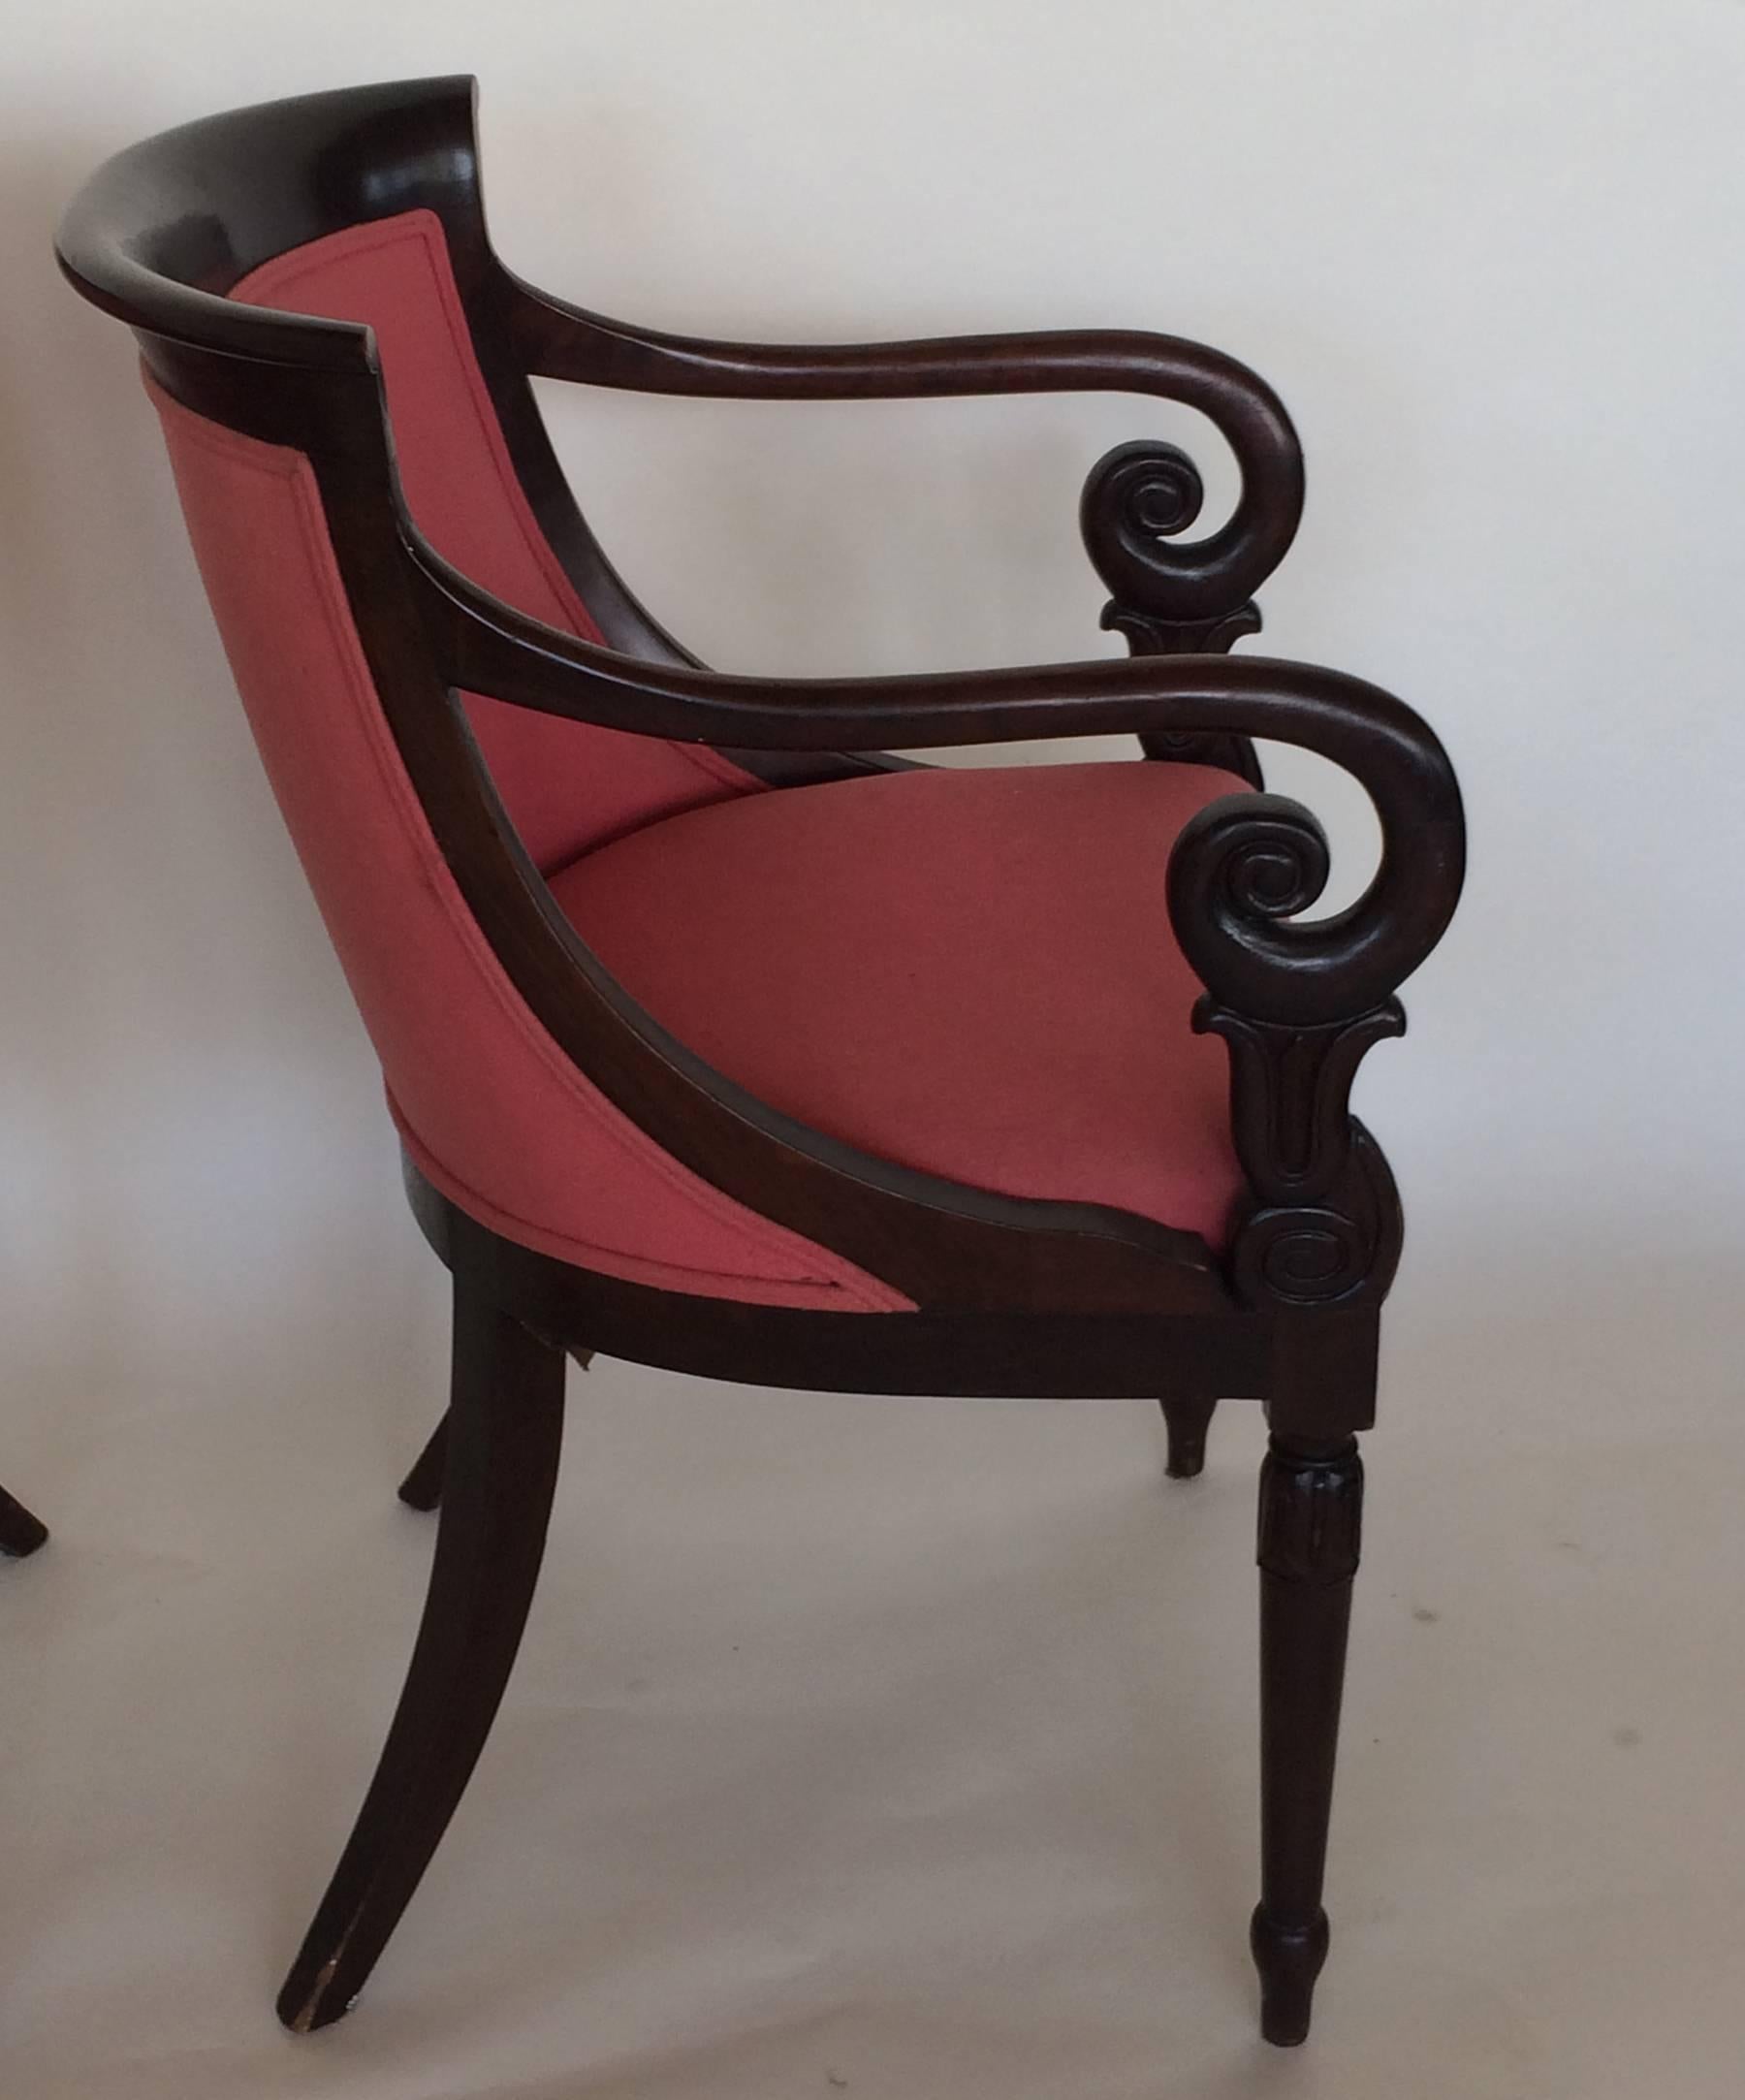 Pair of Biedermeier bergere armchairs. Craved highlights on arms and legs.